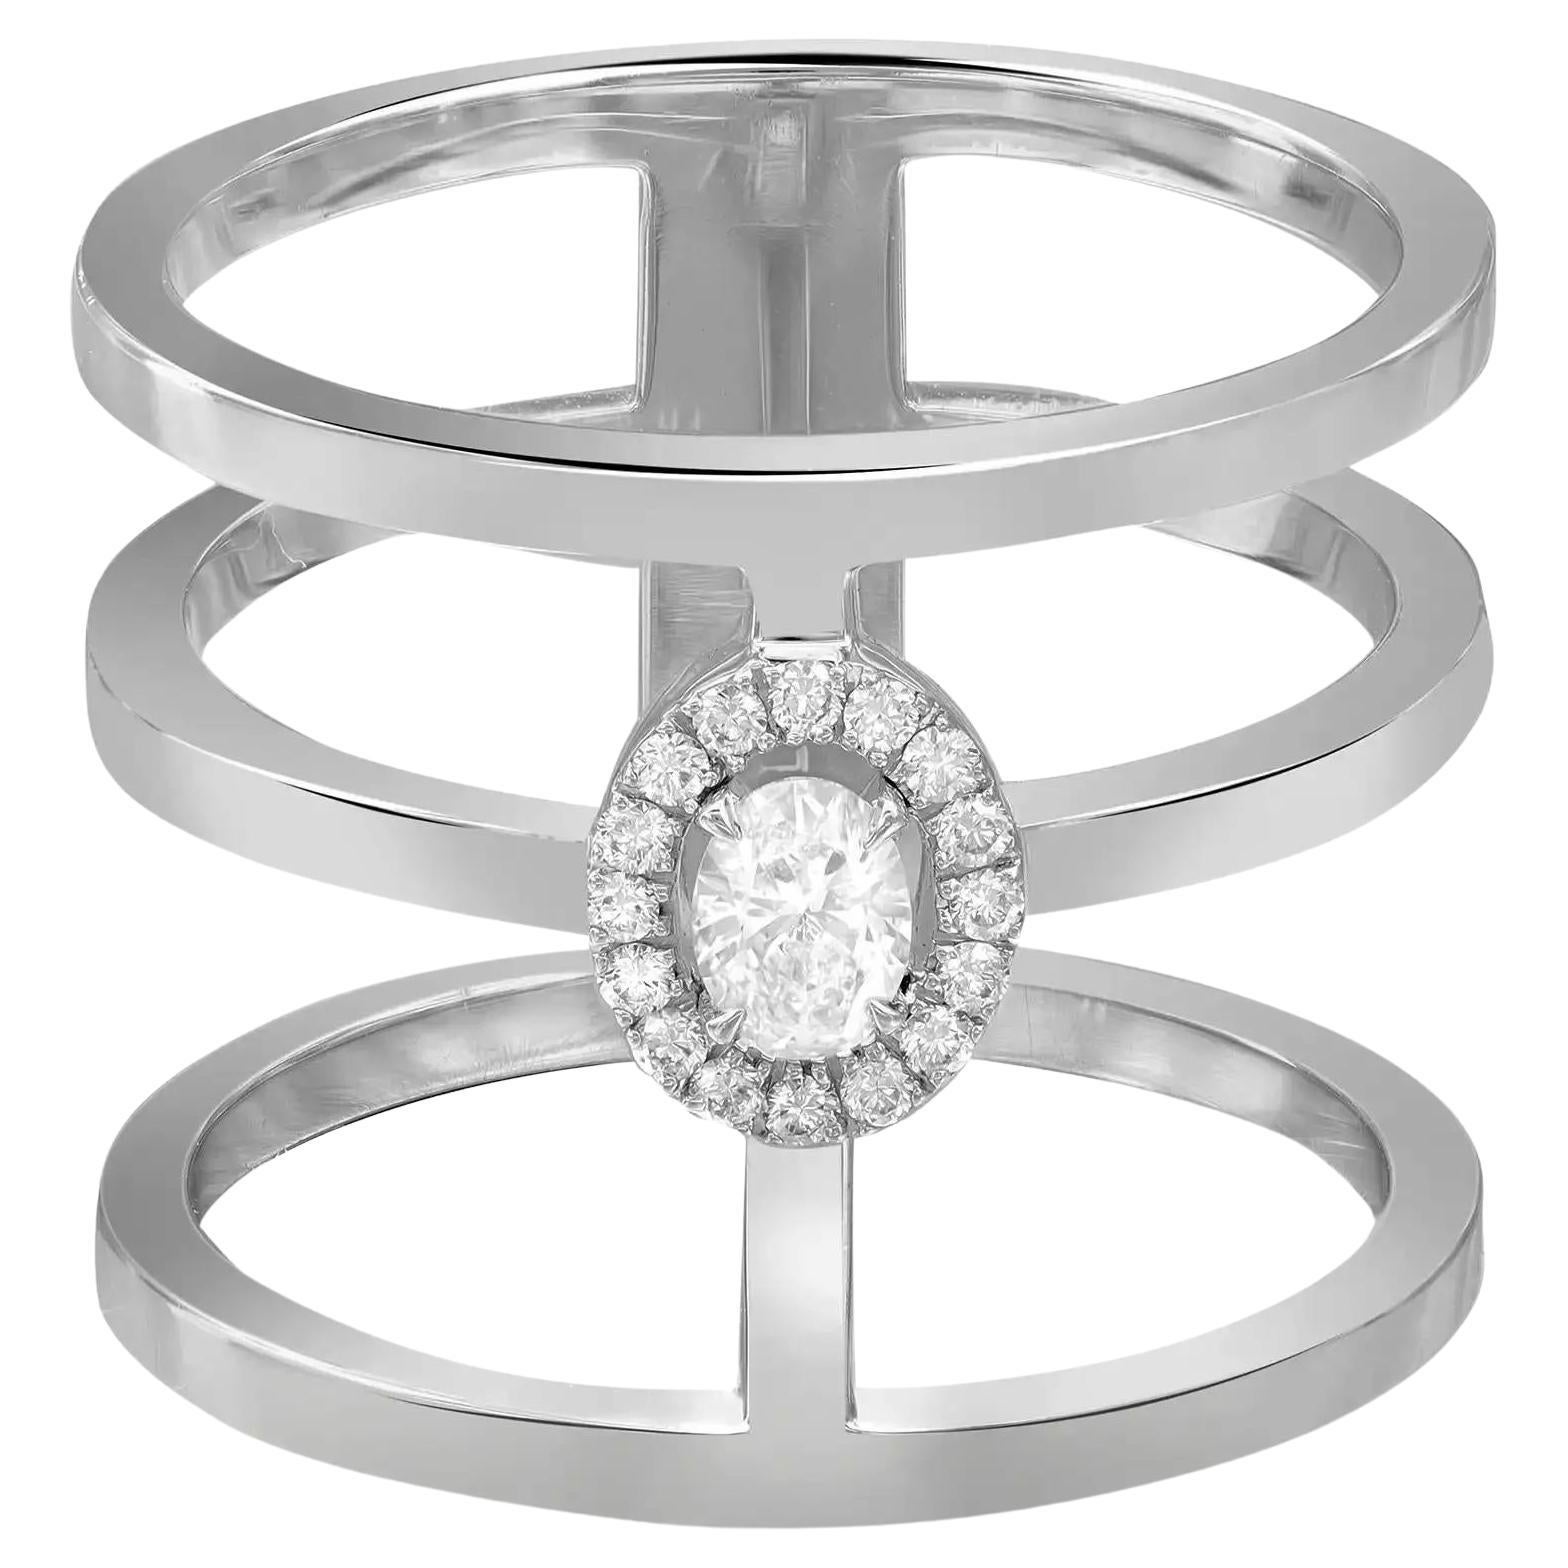 Messika 0.22Ctw Glam'Azone 3 Row Diamond Band Ring 18K White Gold SZ 54 US 7 For Sale